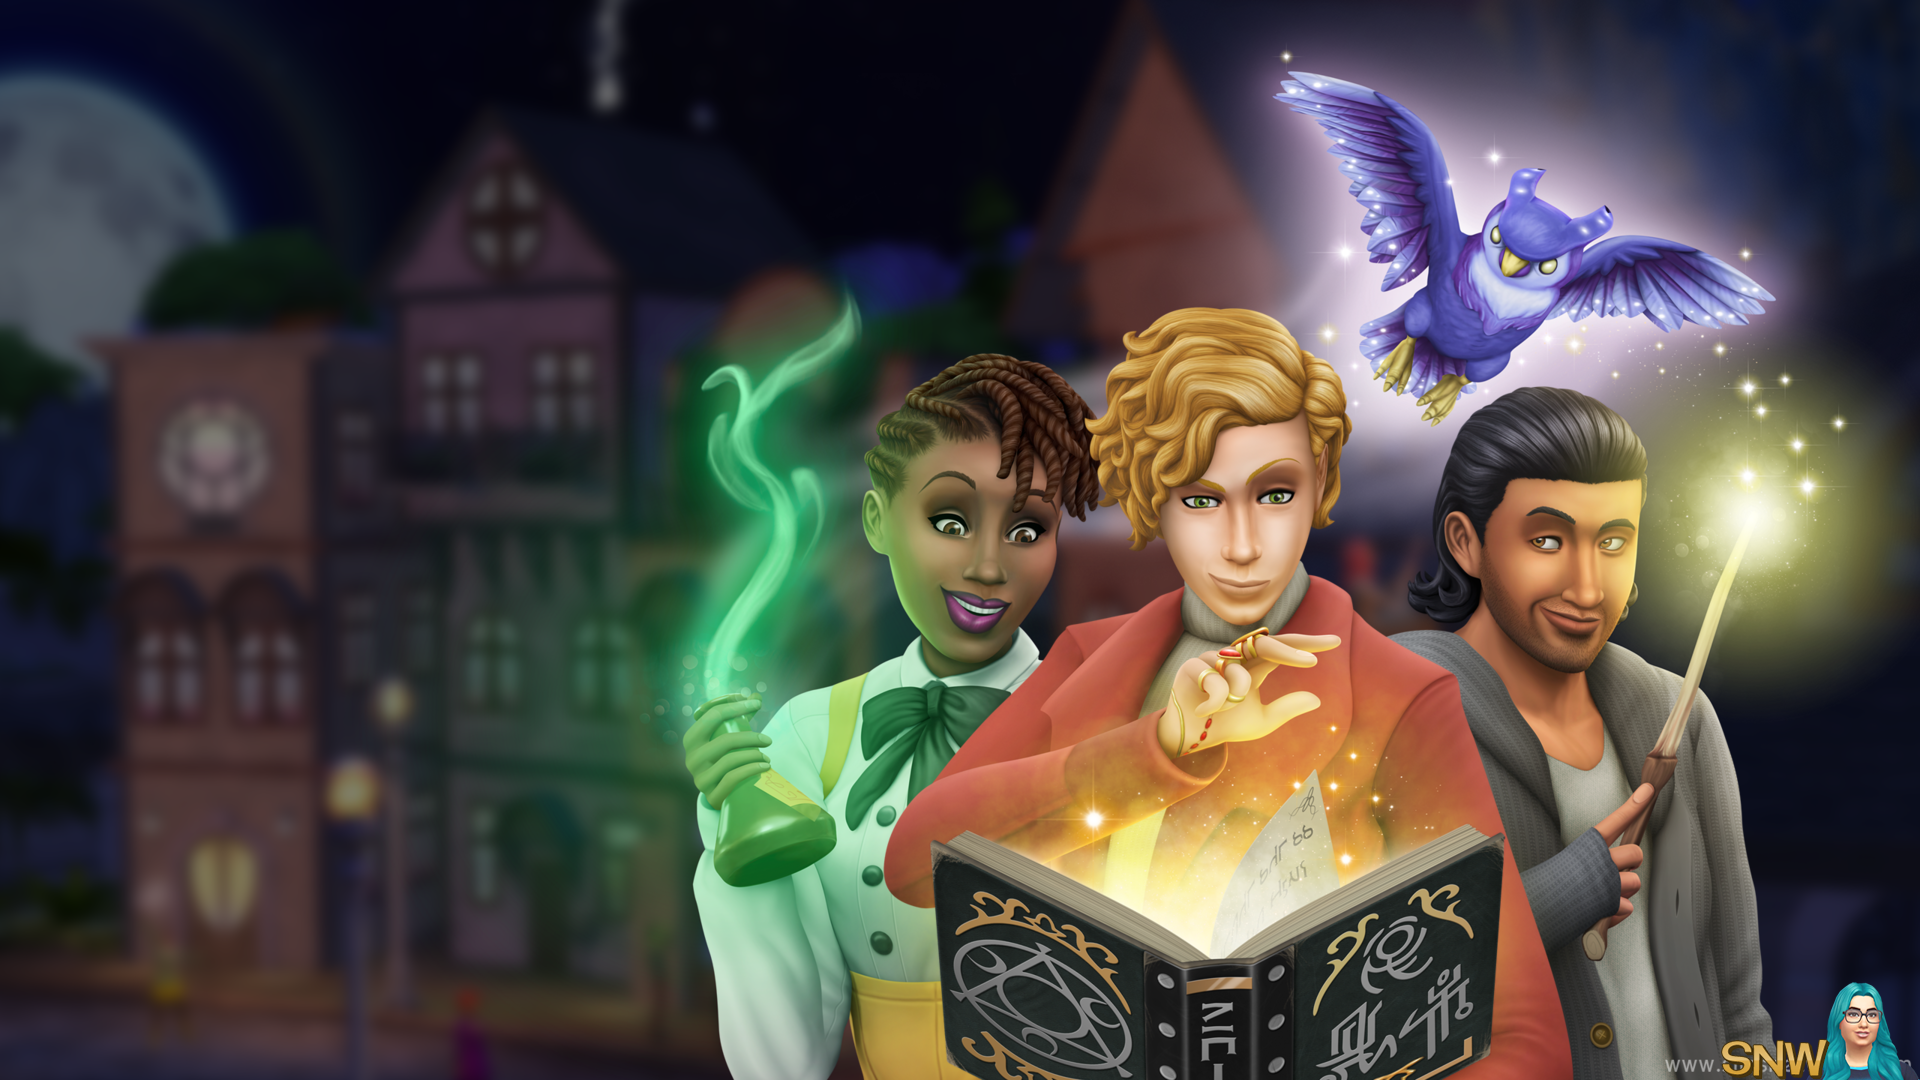 The Sims 4: Realm of Magic 2560x1440 widescreen wallpaper (right)